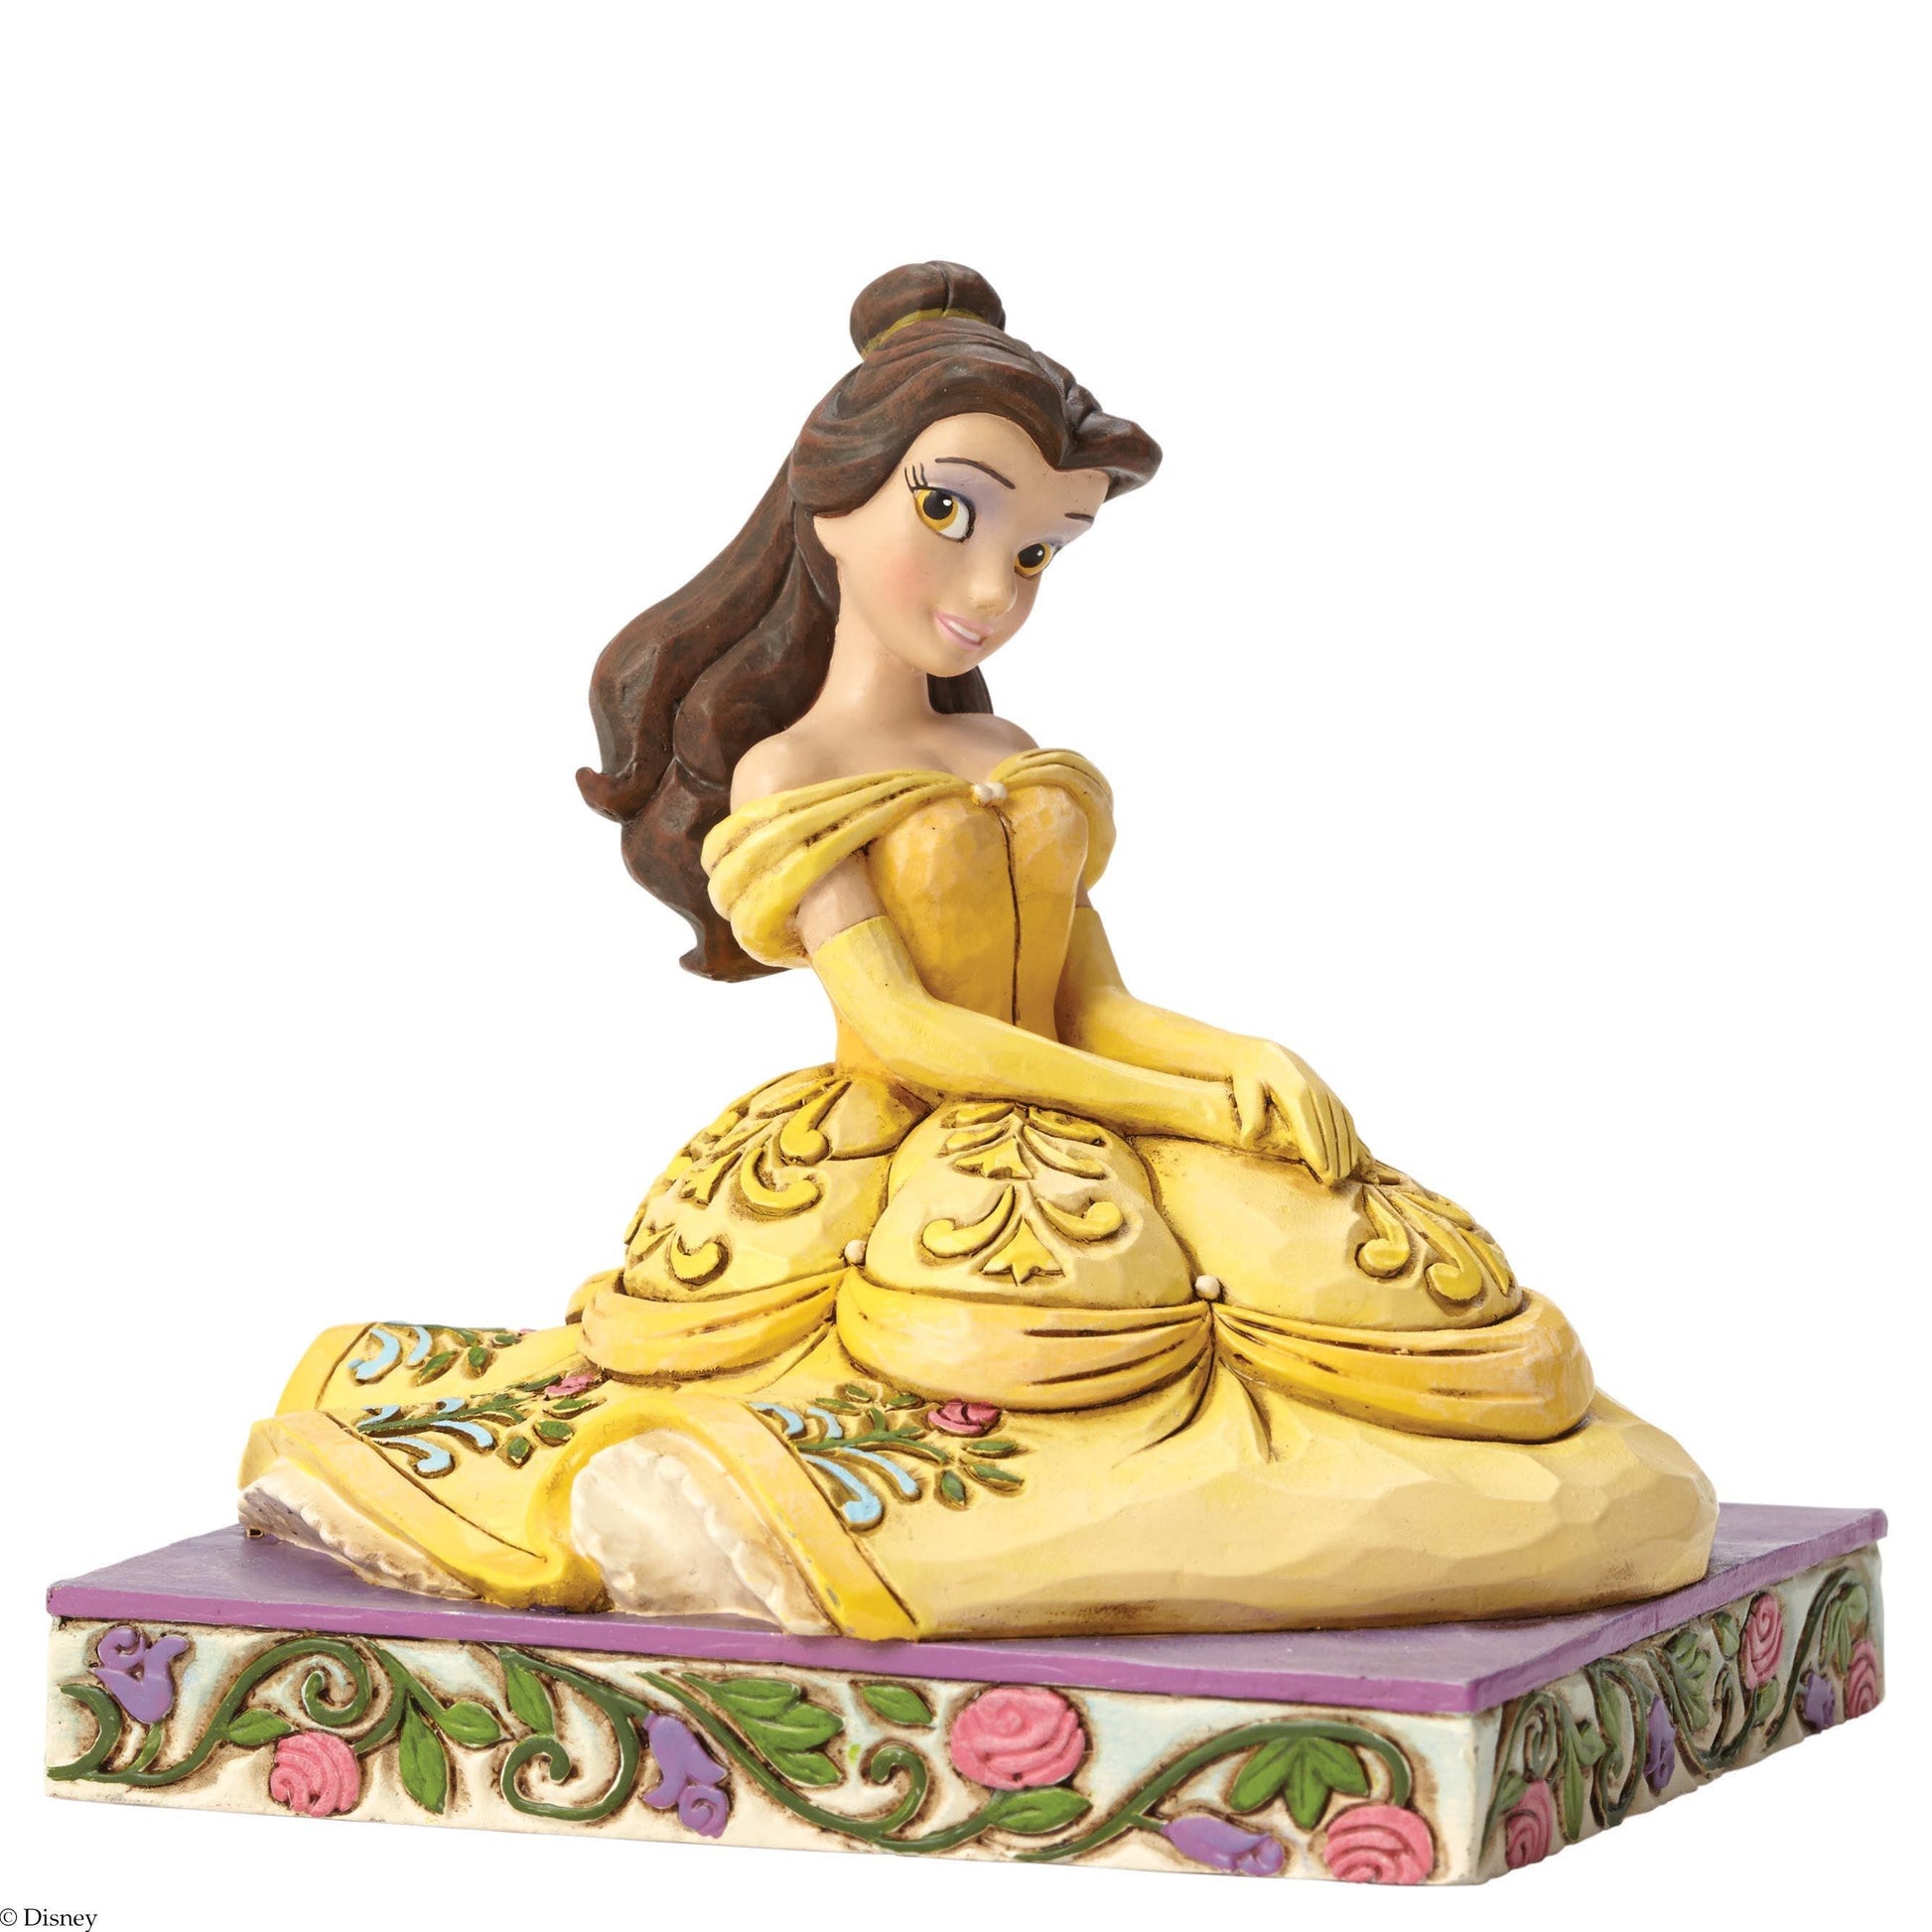 Be Kind (Belle Figurine) (Disney Traditions by Jim Shore) - Gallery Gifts Online 